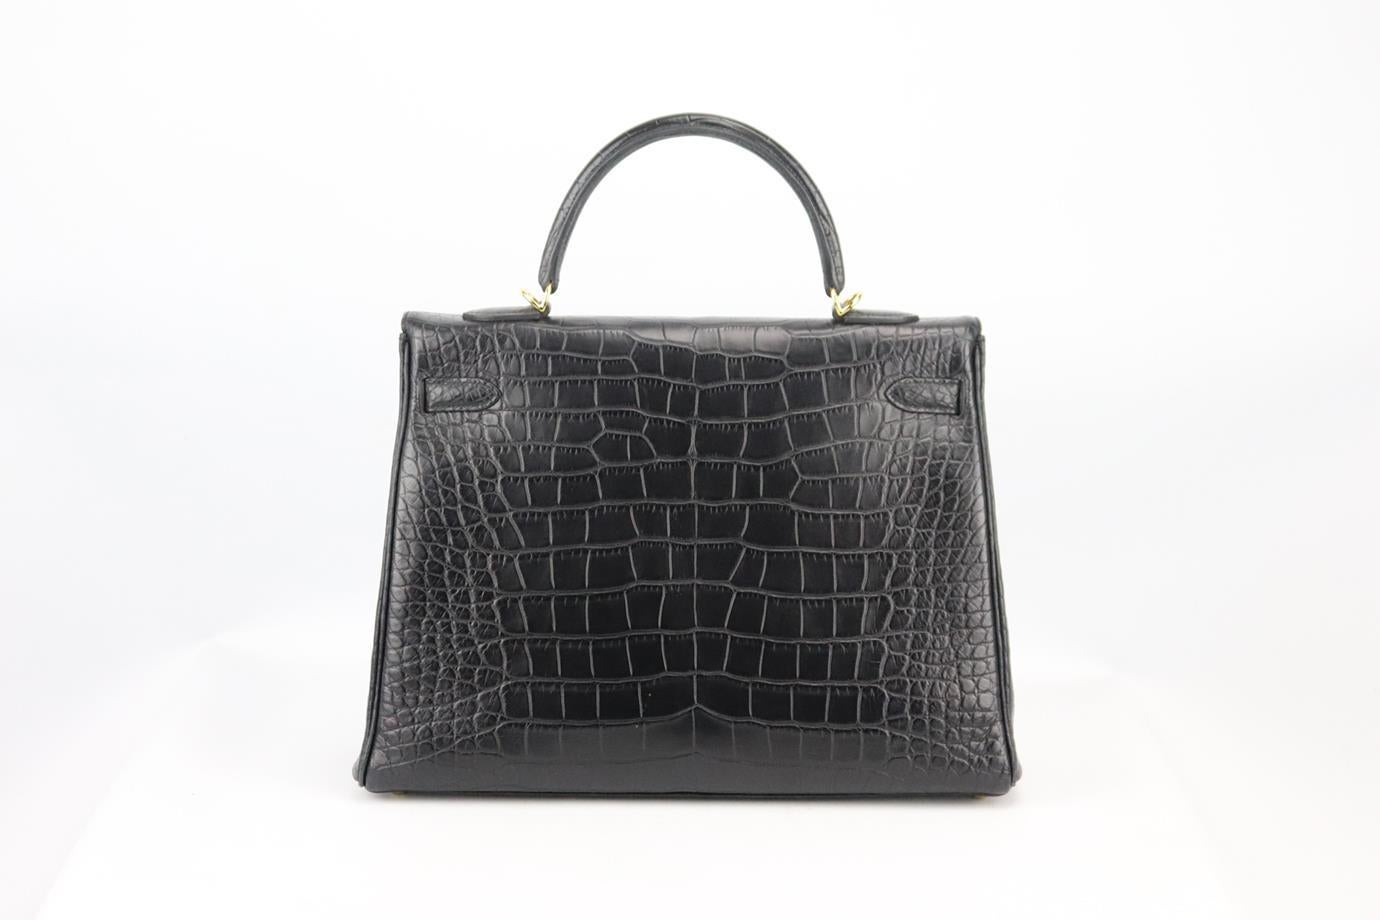 Hermès 2013 Kelly 35cm Matte Alligator Mississippiensis Leather Bag In Excellent Condition For Sale In London, GB